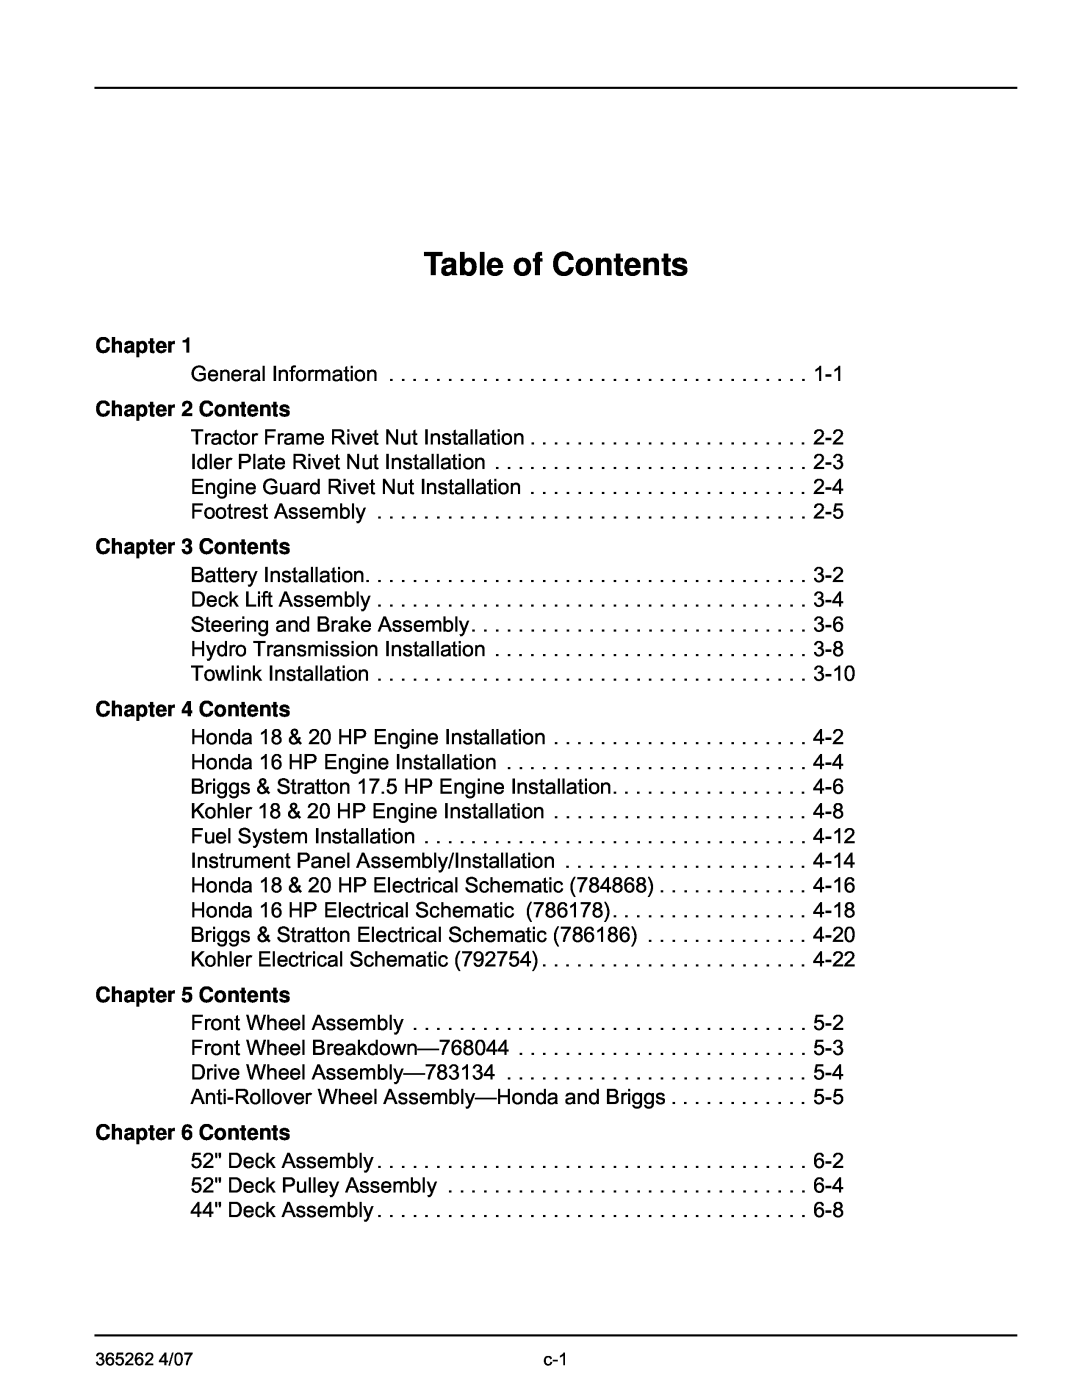 Hustler Turf Lawn Mower manual Table of Contents, Chapter 